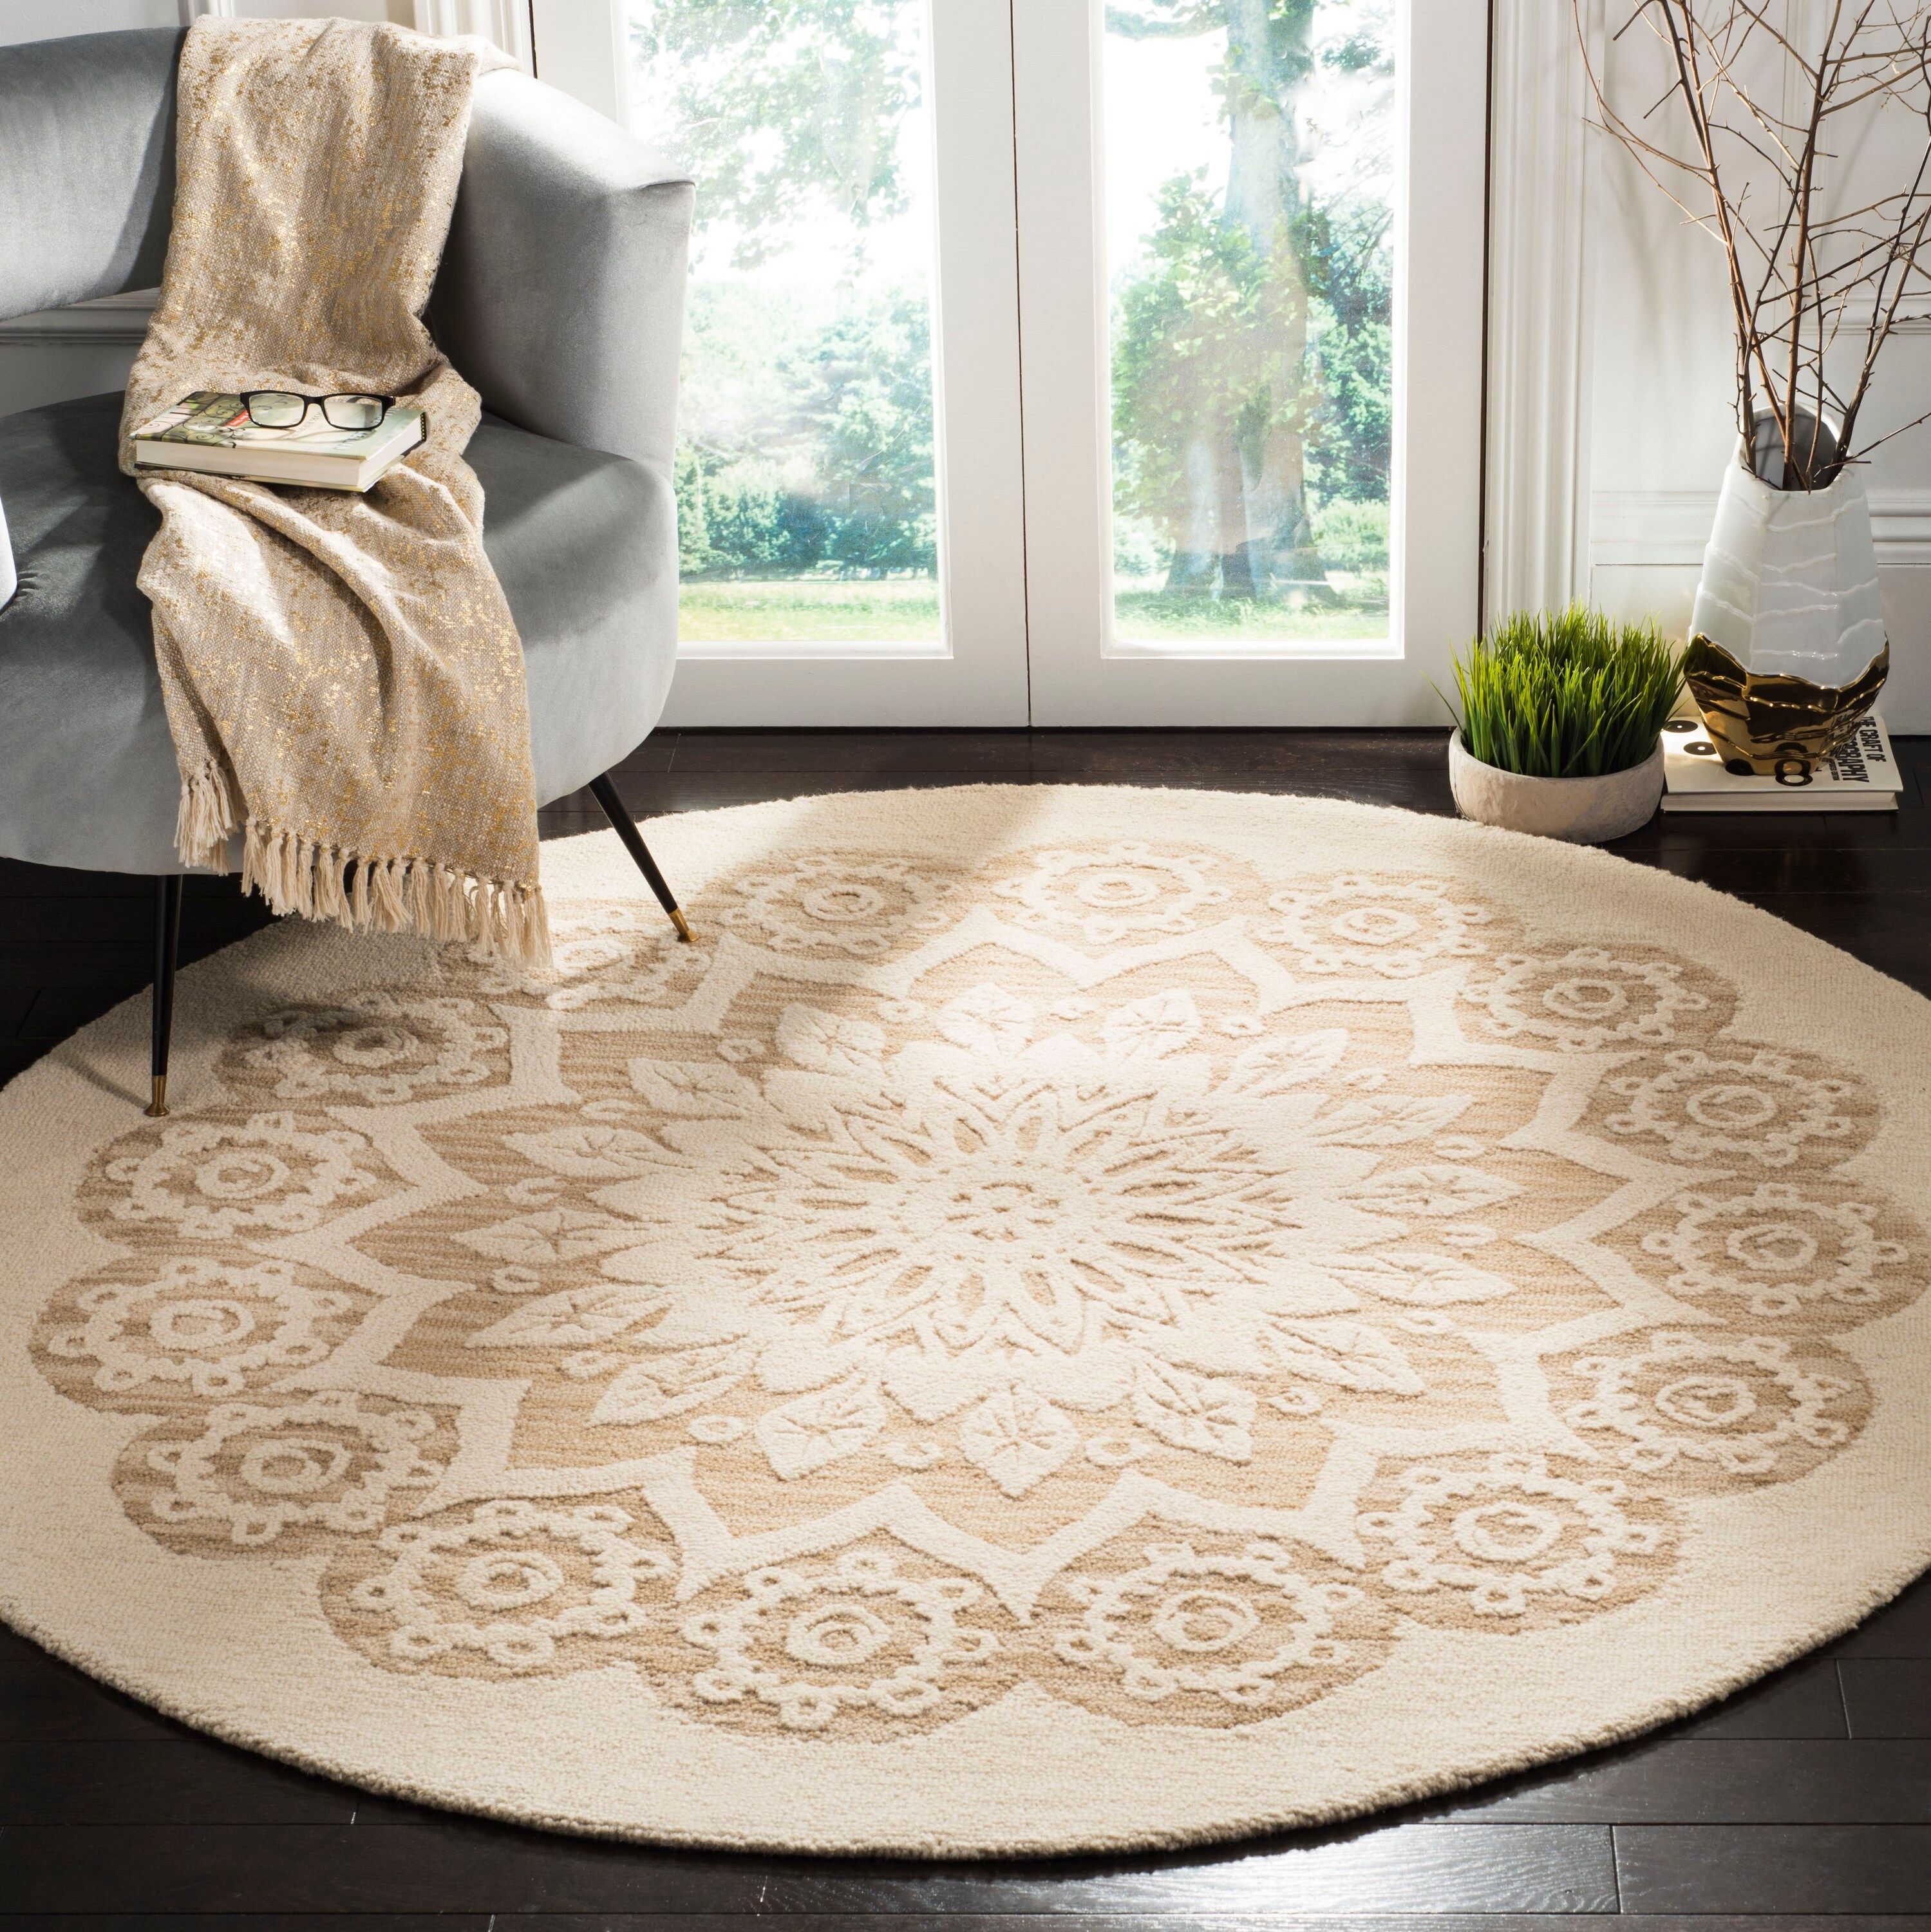 Safavieh Blossom Gladwin 6 X 6 Wool Ivory/beige Round Indoor  Floral/botanical Bohemian/eclectic Area Rug In The Rugs Department At  Lowes Throughout Ivory Blossom Round Rugs (Photo 3 of 15)